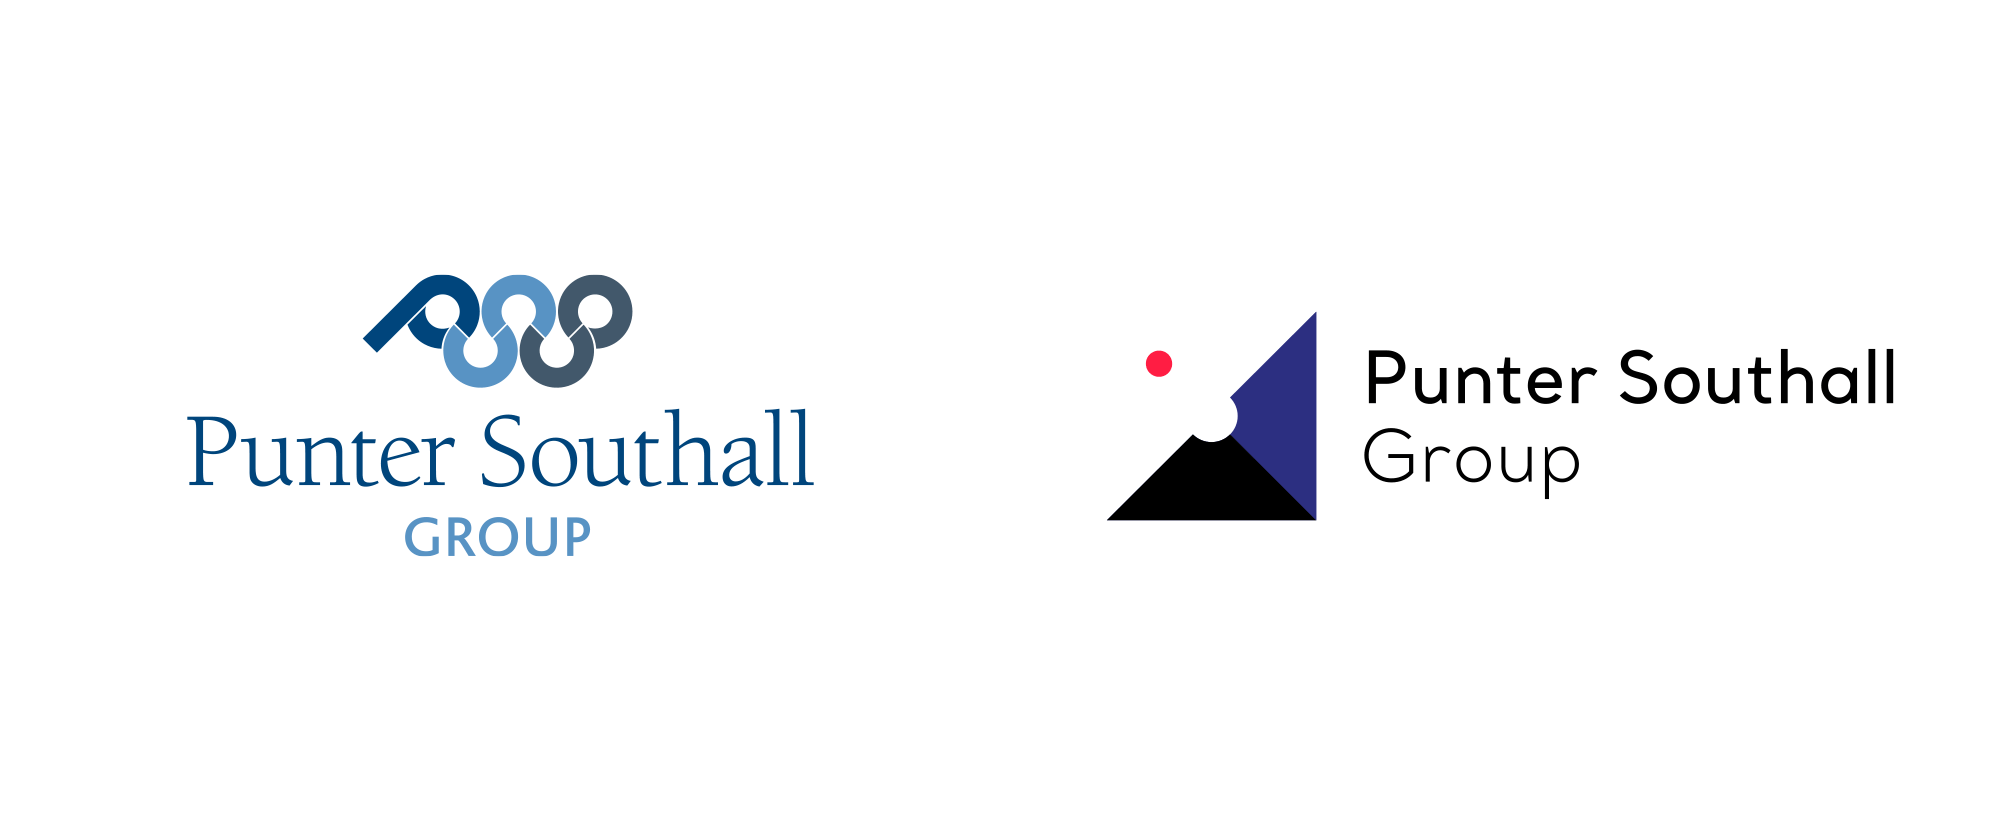 Red Future Logo - Brand New: New Logo and Identity for Punter Southall Group by Future ...